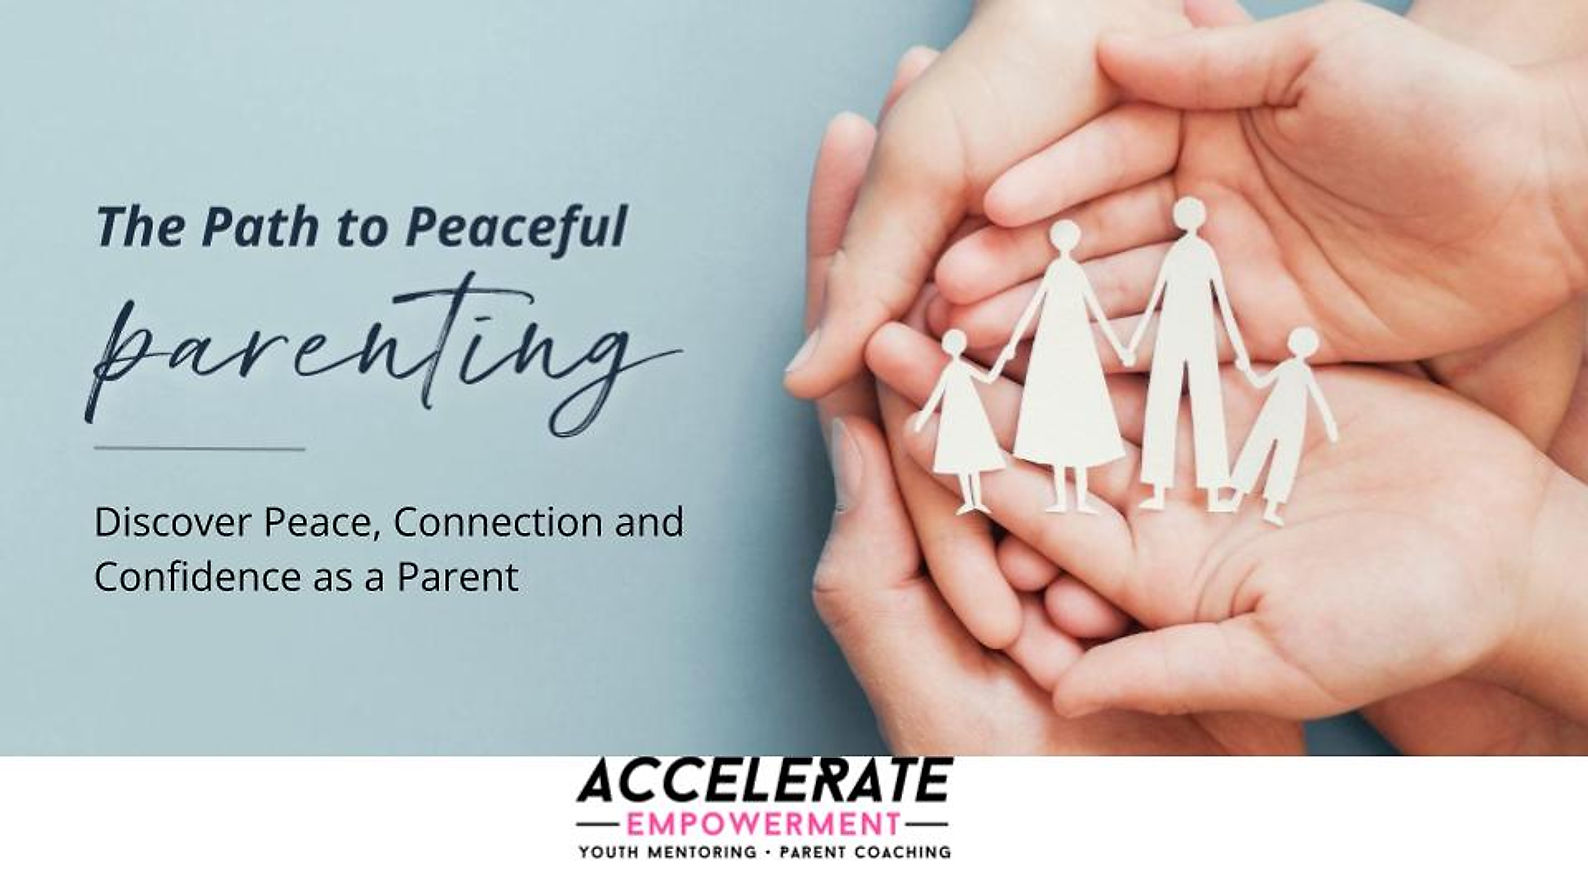 The Path to Peaceful Parenting